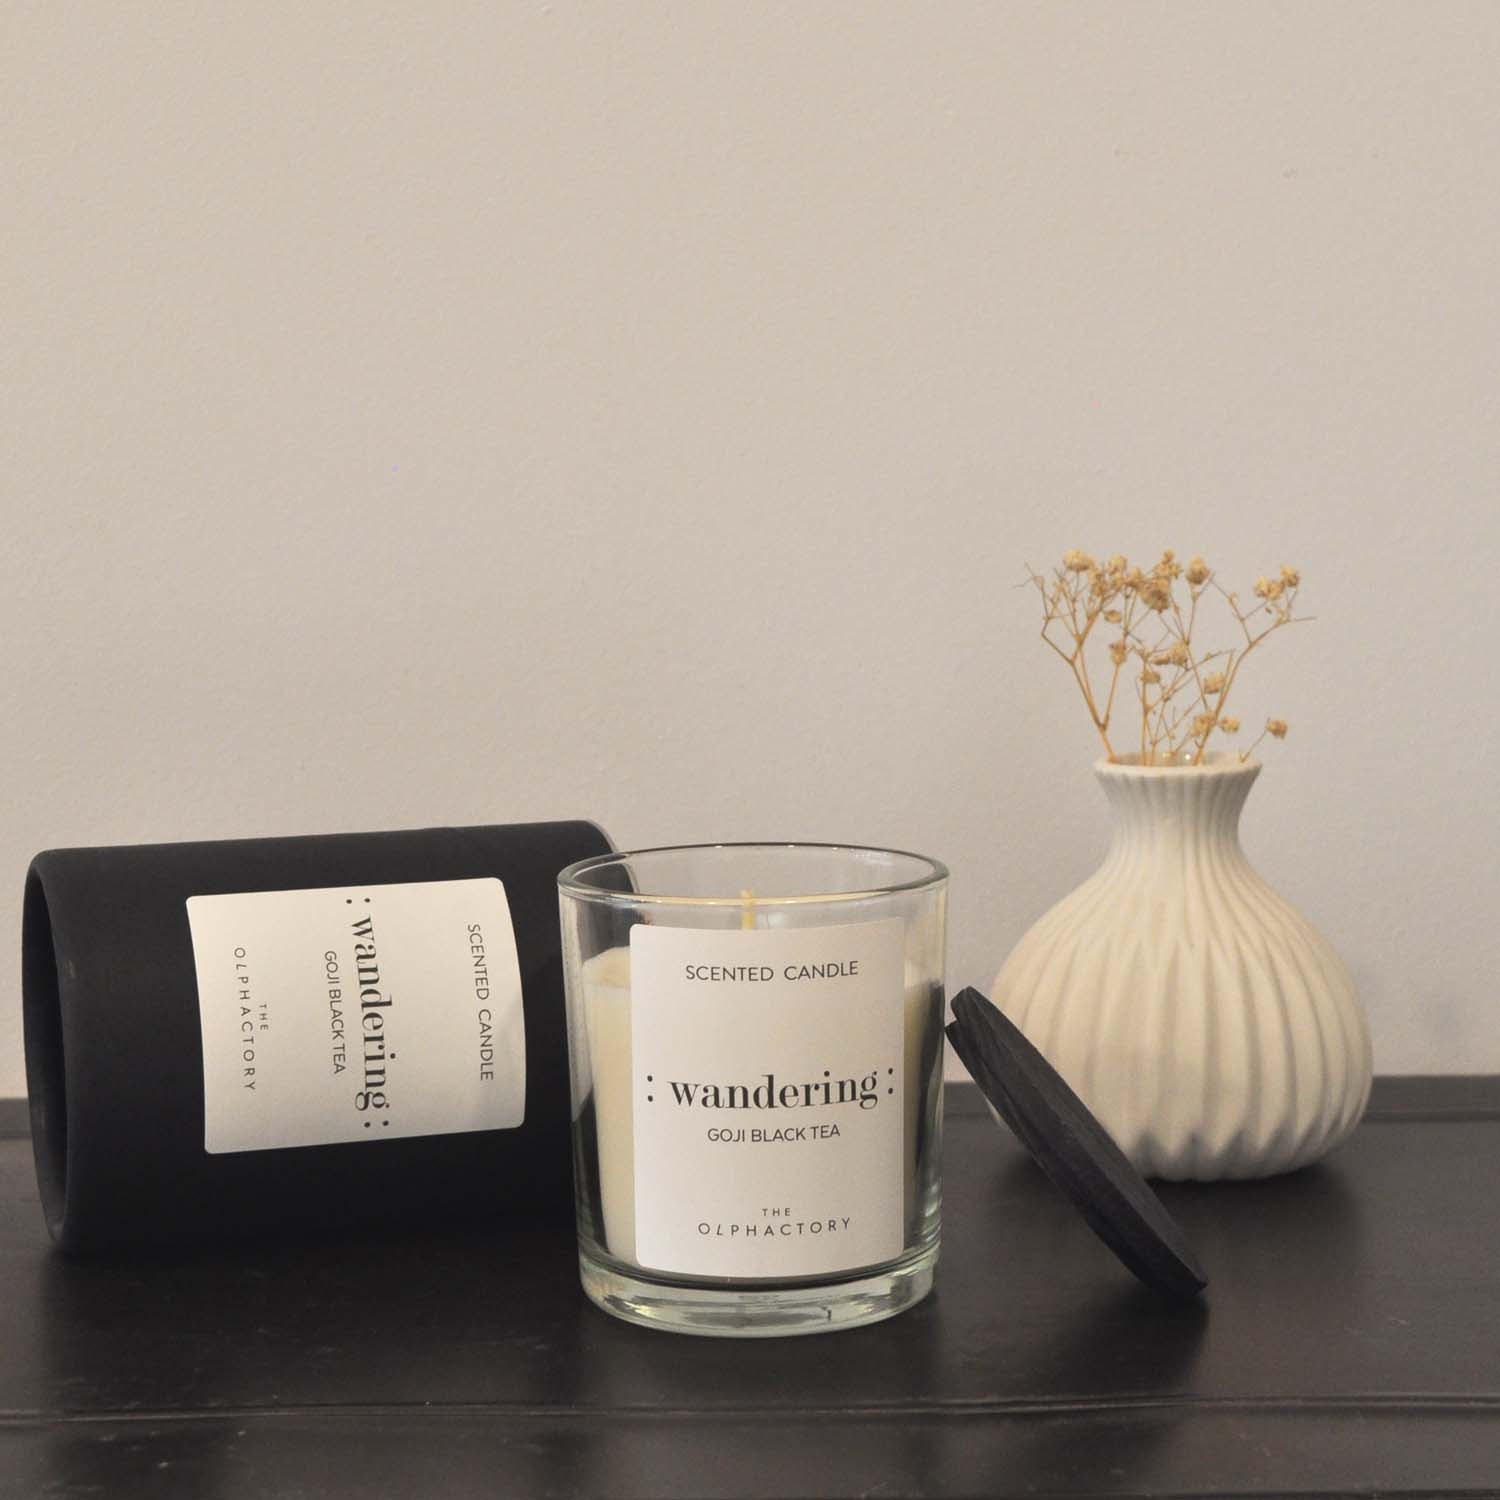 Scented Candle 40h- The Olphactory Black- Wandering- Goji